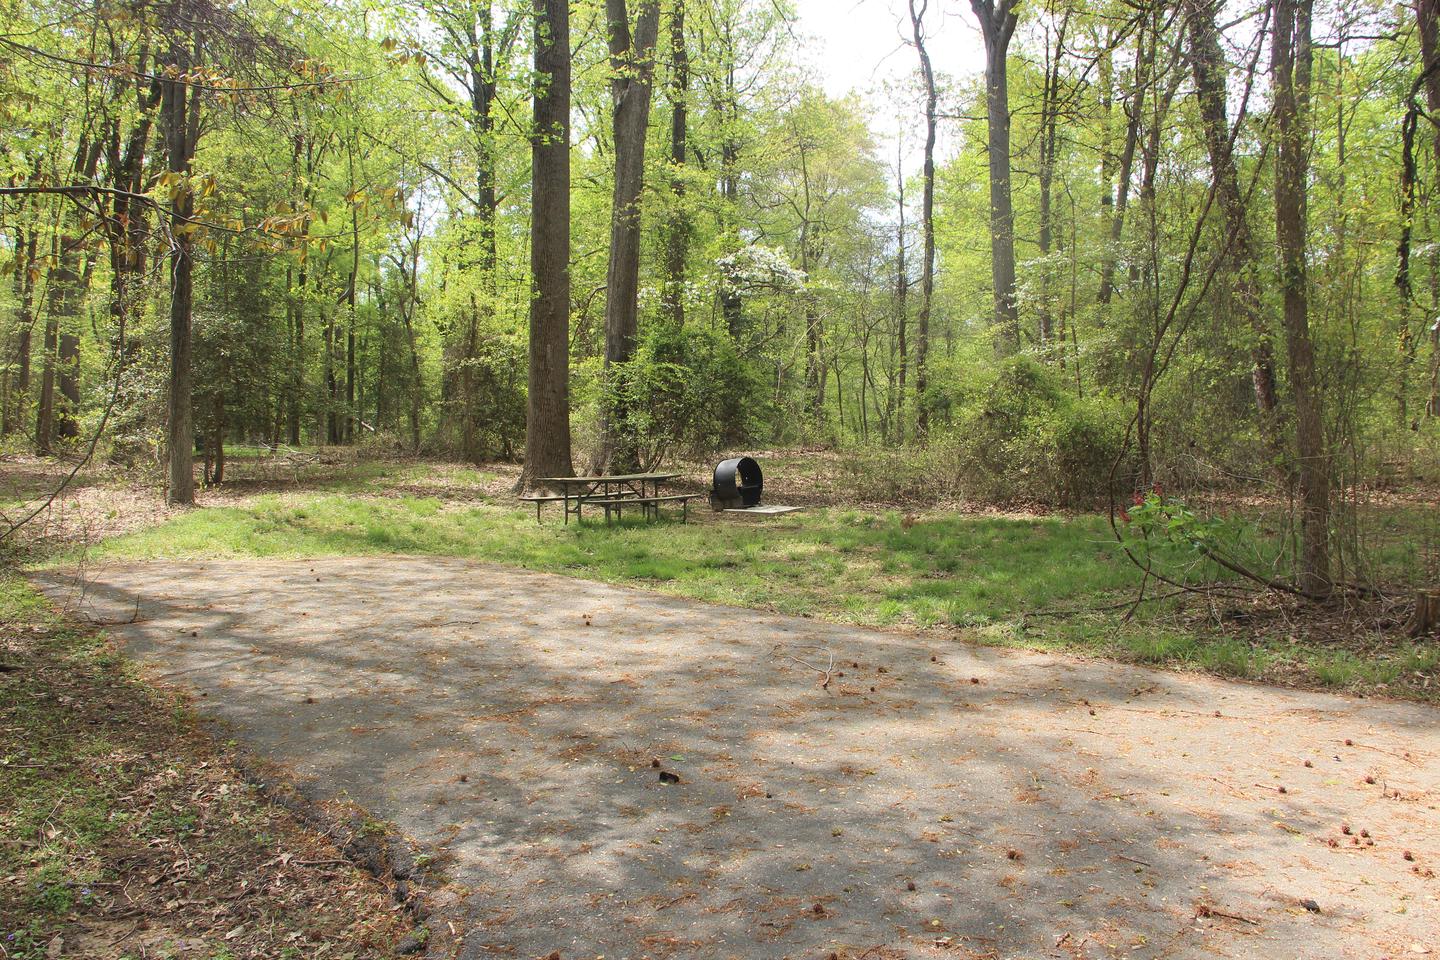 D 121  D Loop of the Greenbelt Park Md campgroundD 121  D Loop of the Greenbelt Park Maryland campground (former Site 124)